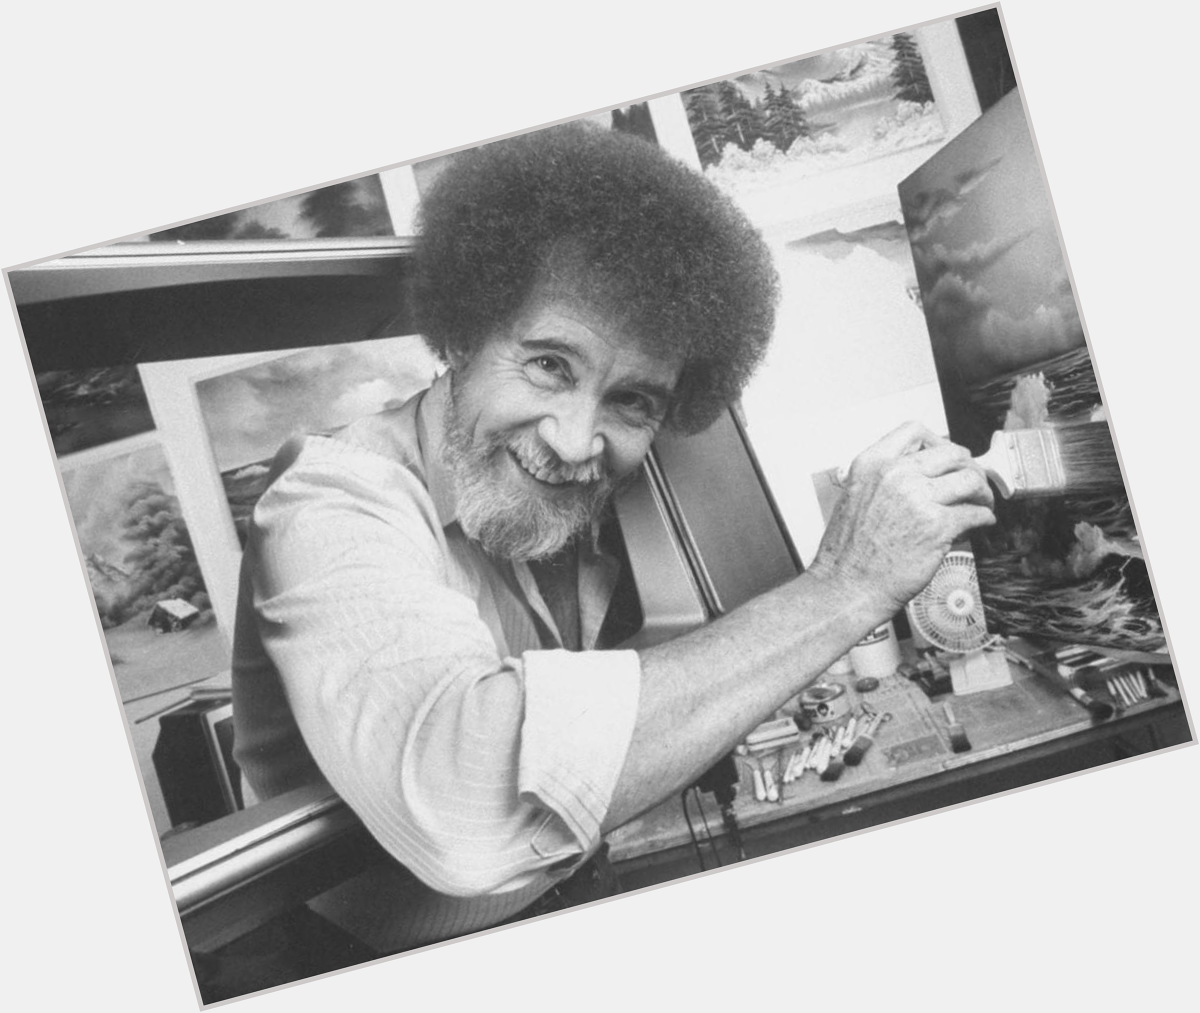 Happy 78th birthday to Bob Ross!

\The Joy of Painting\ remains a therapeutic series for many people. 